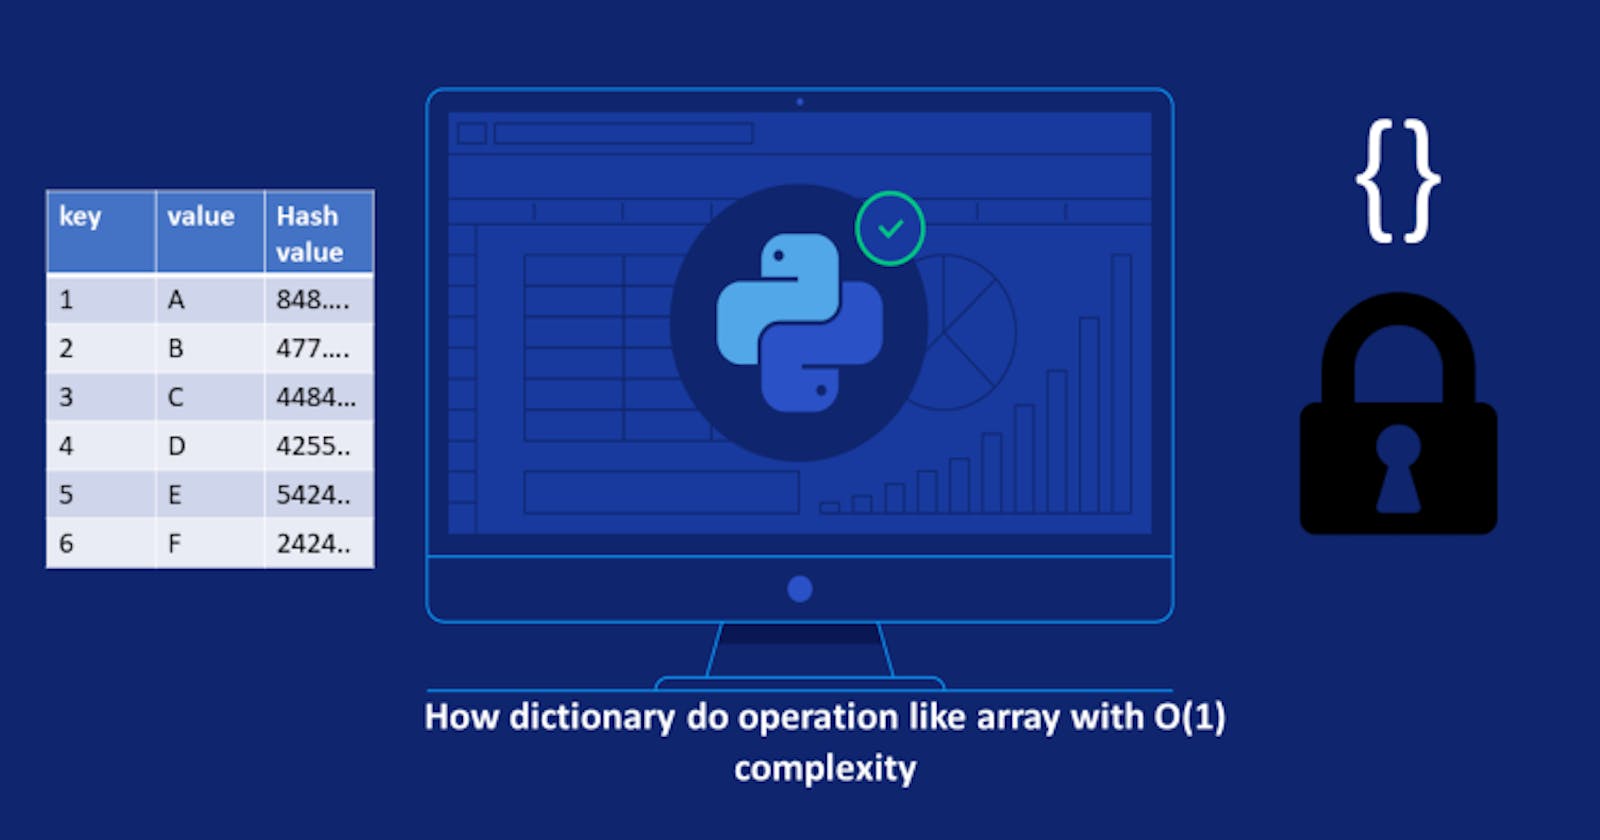 How dictionary do operation like an array with O(1) complexity